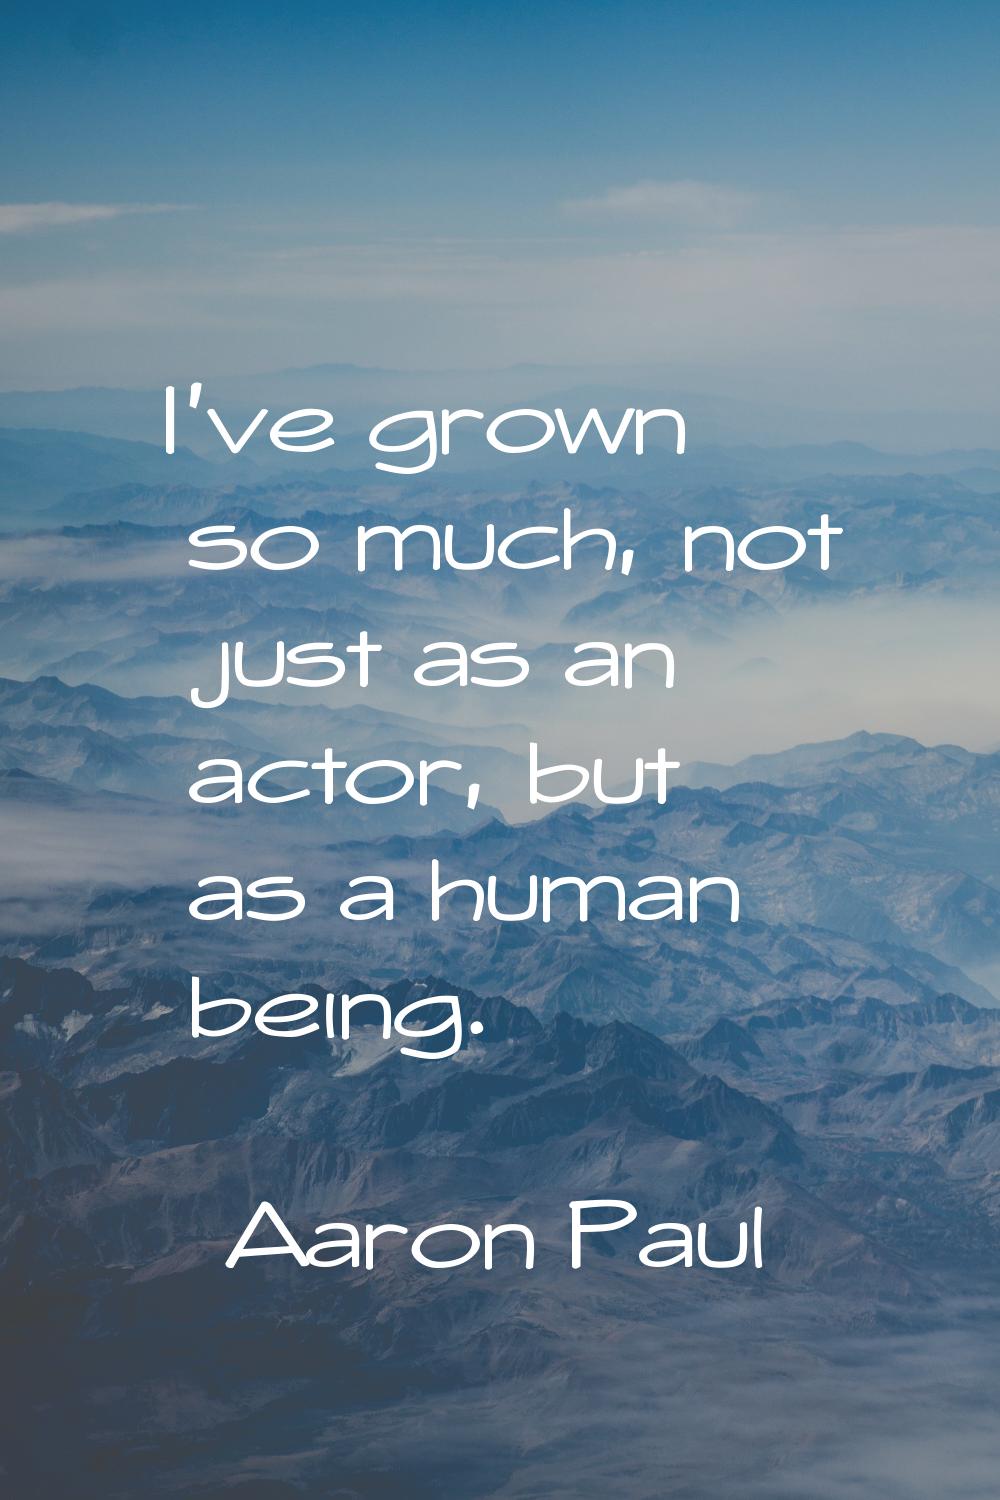 I've grown so much, not just as an actor, but as a human being.